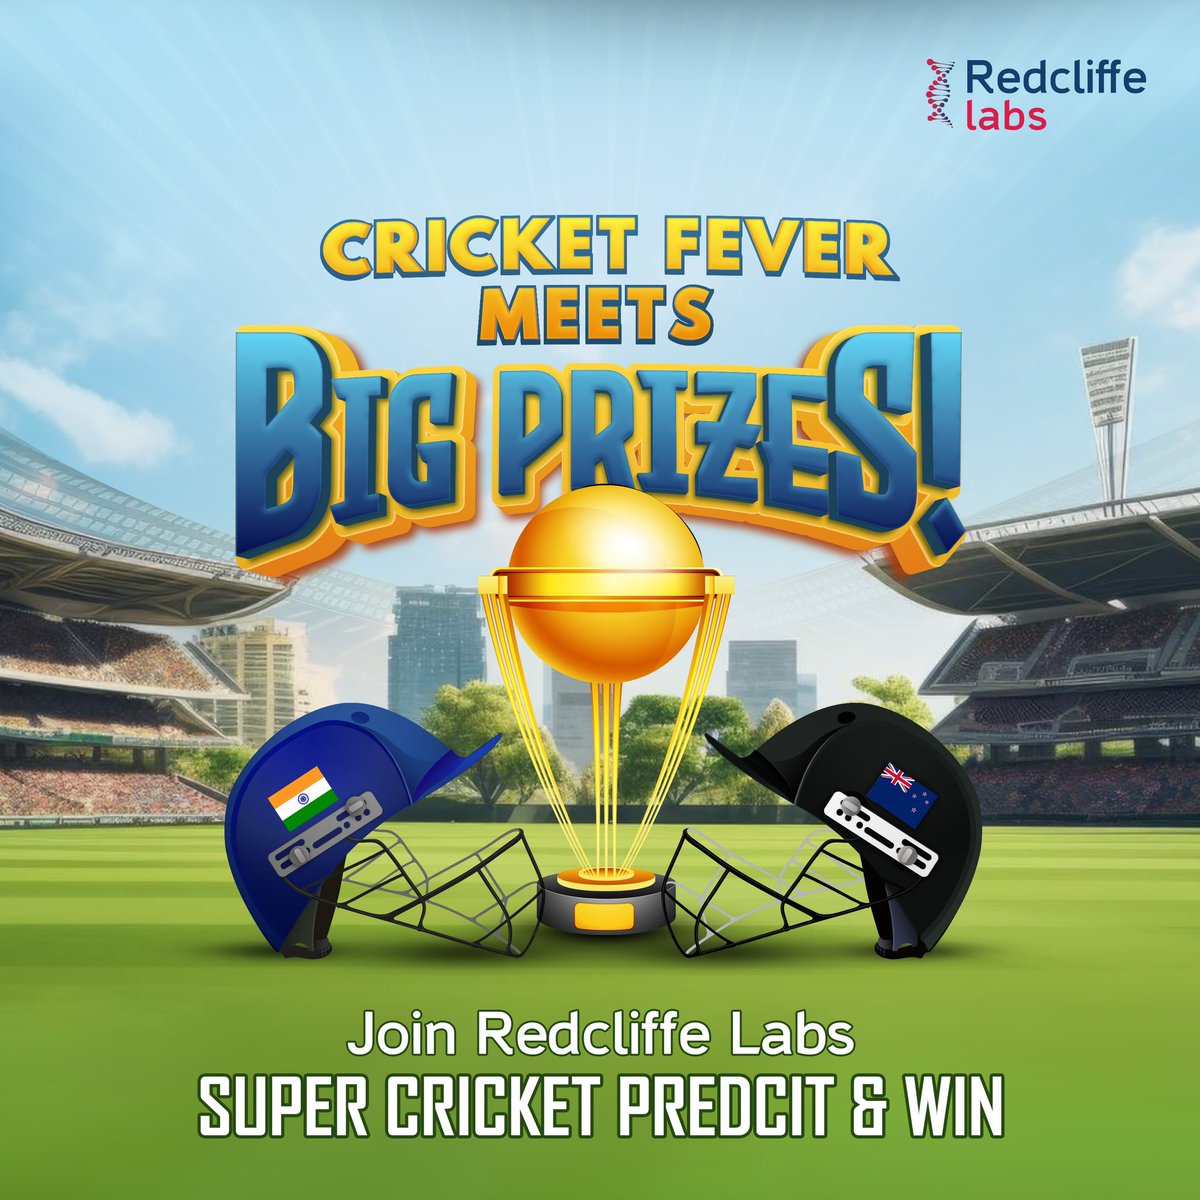 Predict Winning Score & Win RedCash, #VIPMembership, #AmazonVouchers, #FreeFullBodyHealthCheckup! 
T&C: 
Winners announced: November 17
Health check-up available until: November 20
RedCash reward: ₹100 Redeemable during your next #healthcheckup.
#redcliffelabs #CricketWorldCup